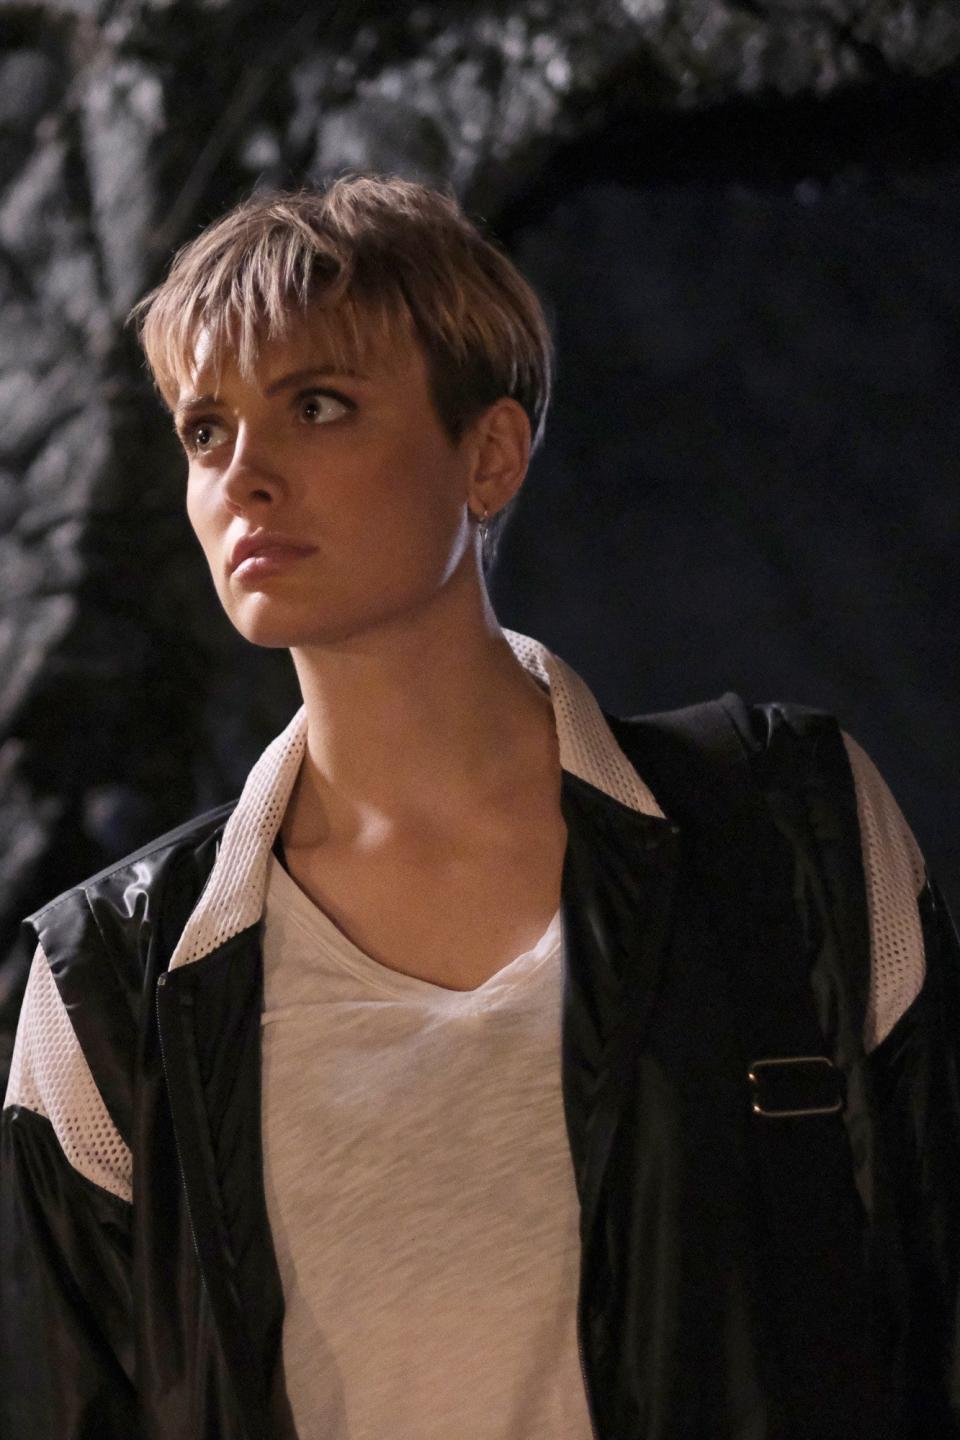 Wallis Daywith short hair in casual attire stands in front of a rocky wall, looking towards the left with a concerned expression